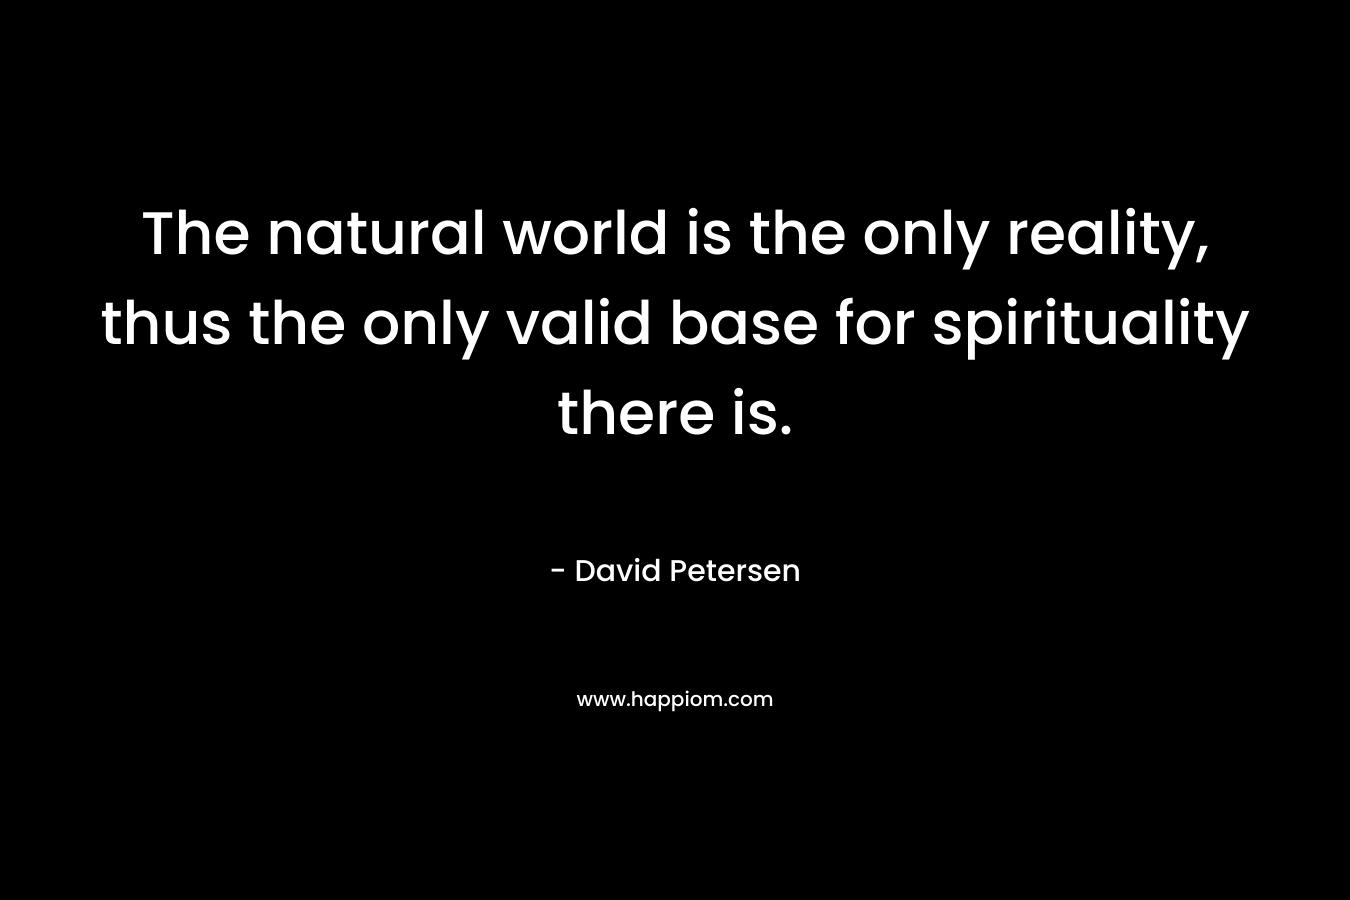 The natural world is the only reality, thus the only valid base for spirituality there is.